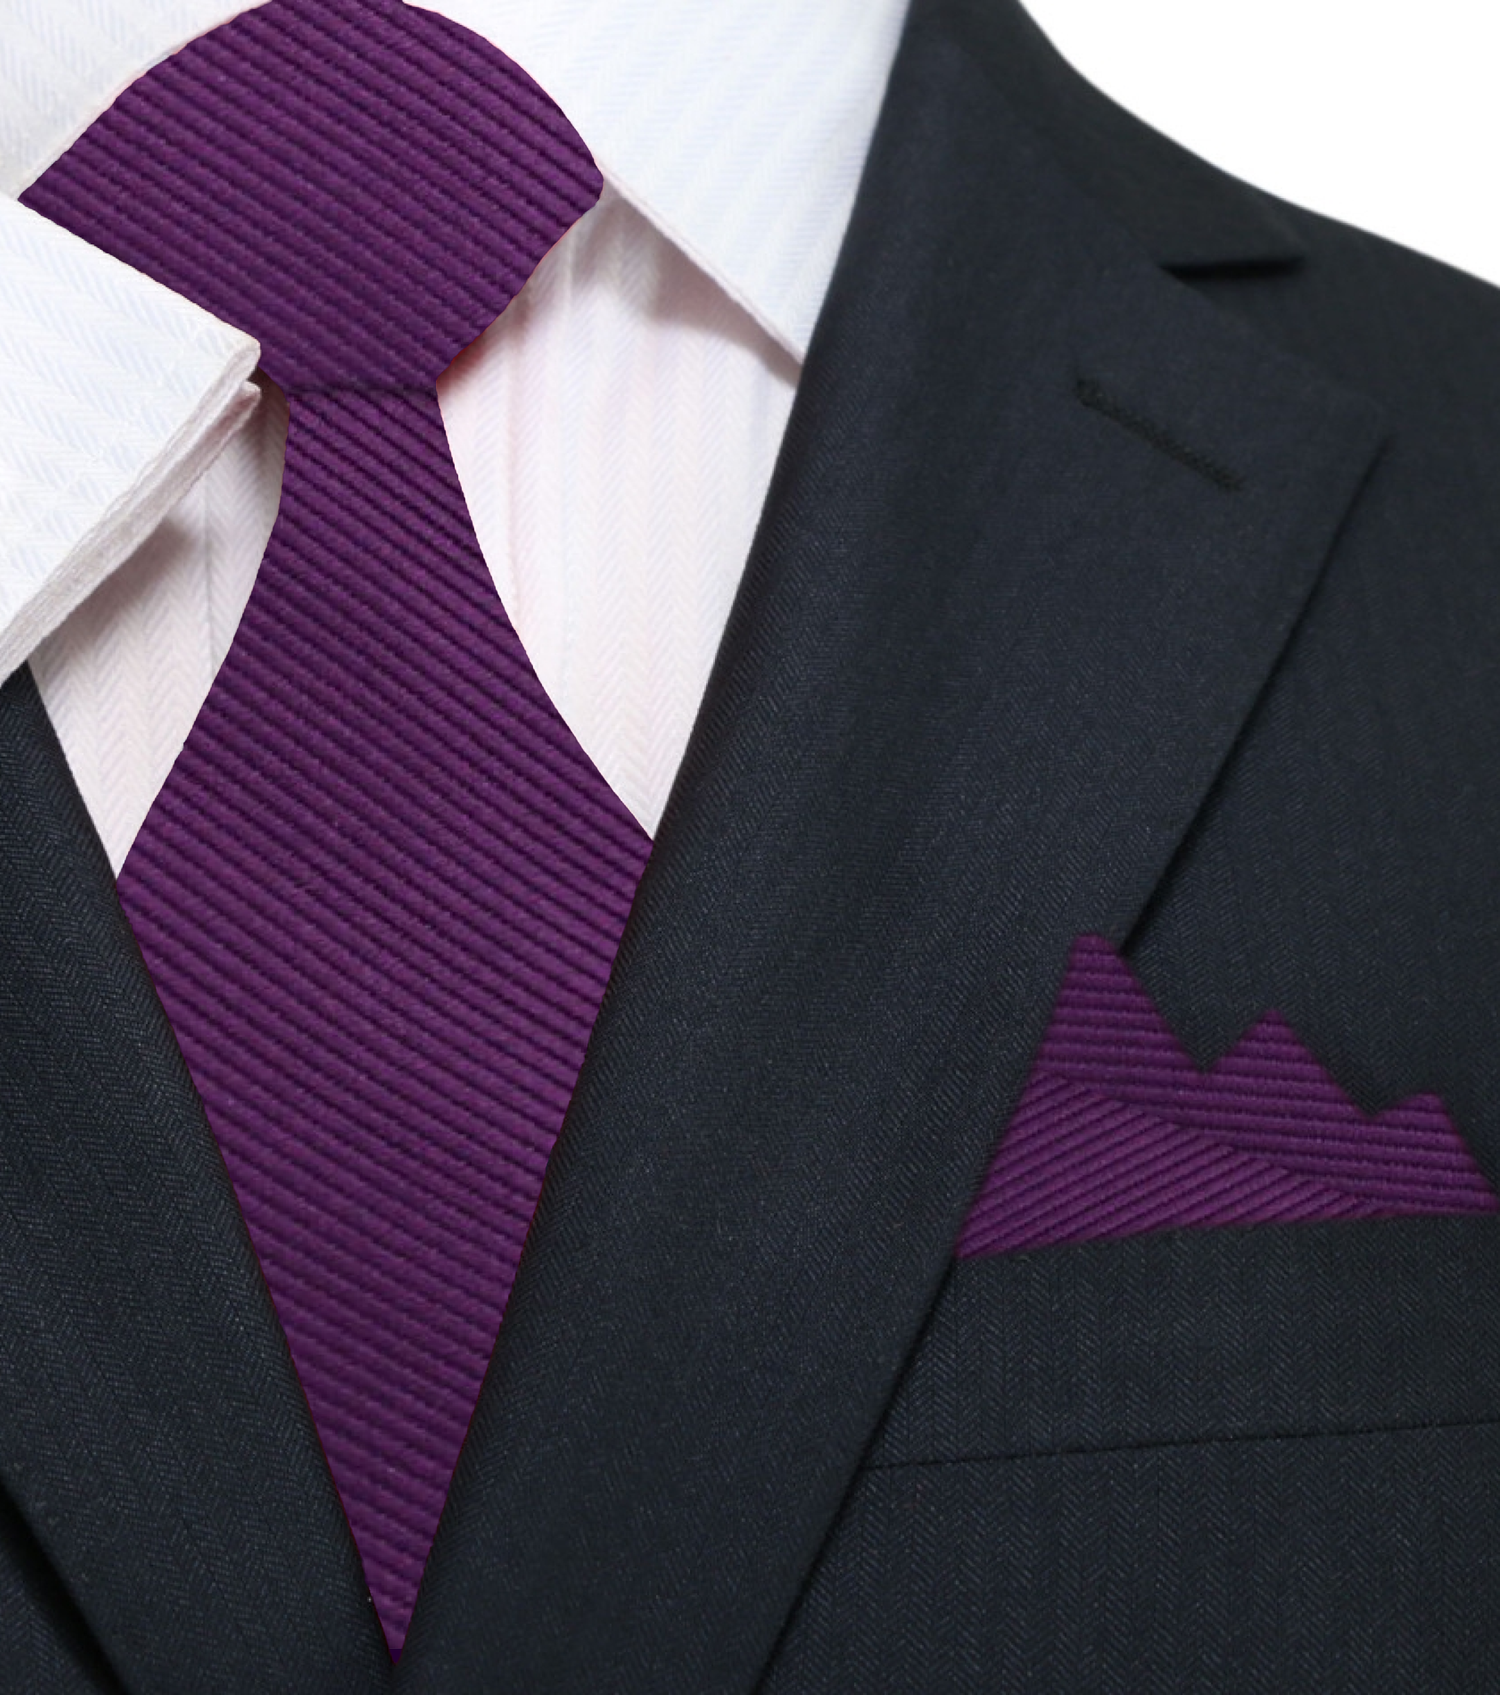 A Solid Deep Purple Colored Silk Necktie With Matching Pocket Square ||Purple